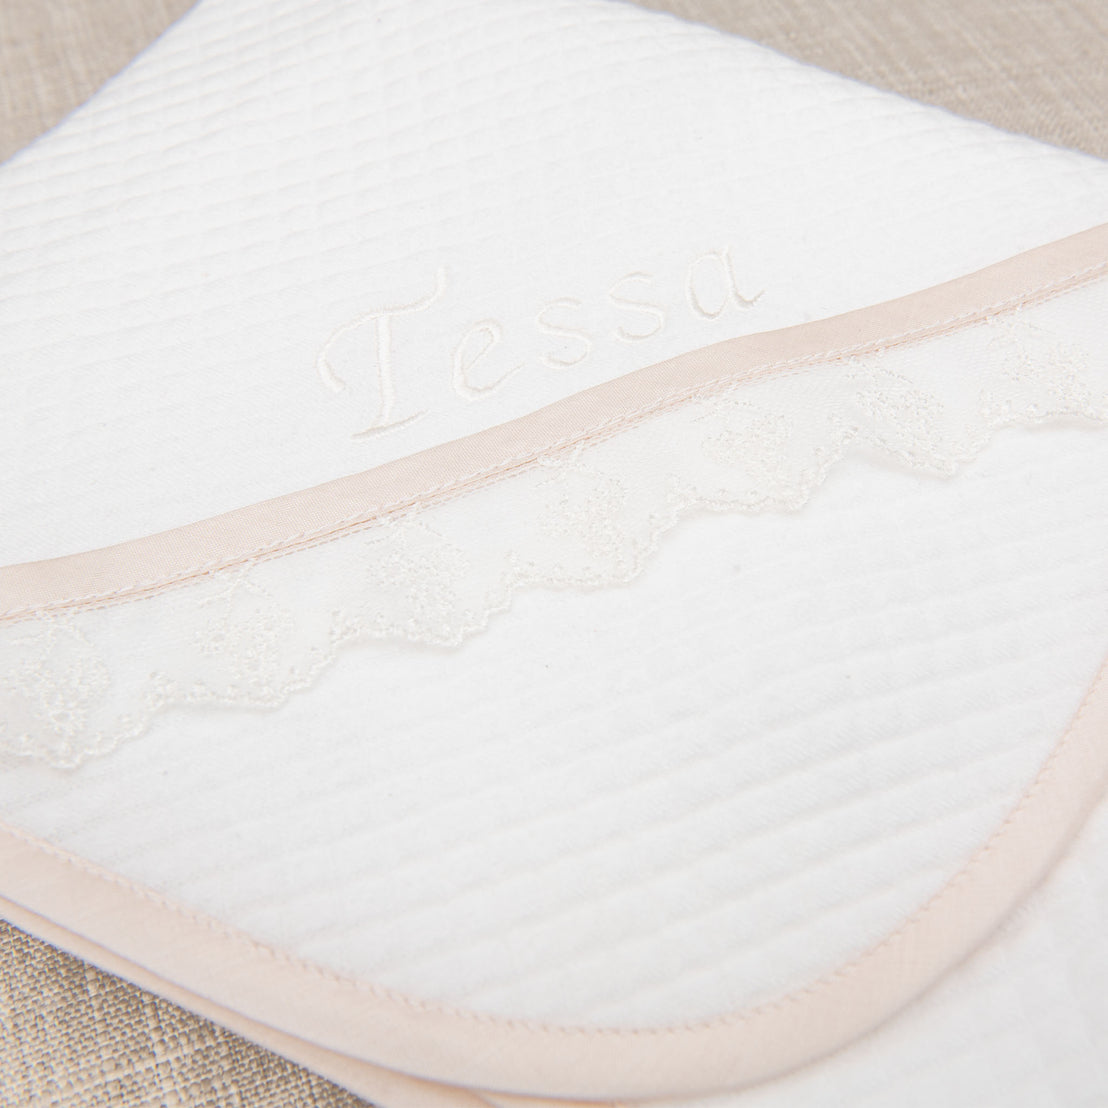 Flat lay photo of the Tessa Personalized Blanket made from a textured cotton in white and featuring a ivory embroidered lace trim and personalized name embroidery.